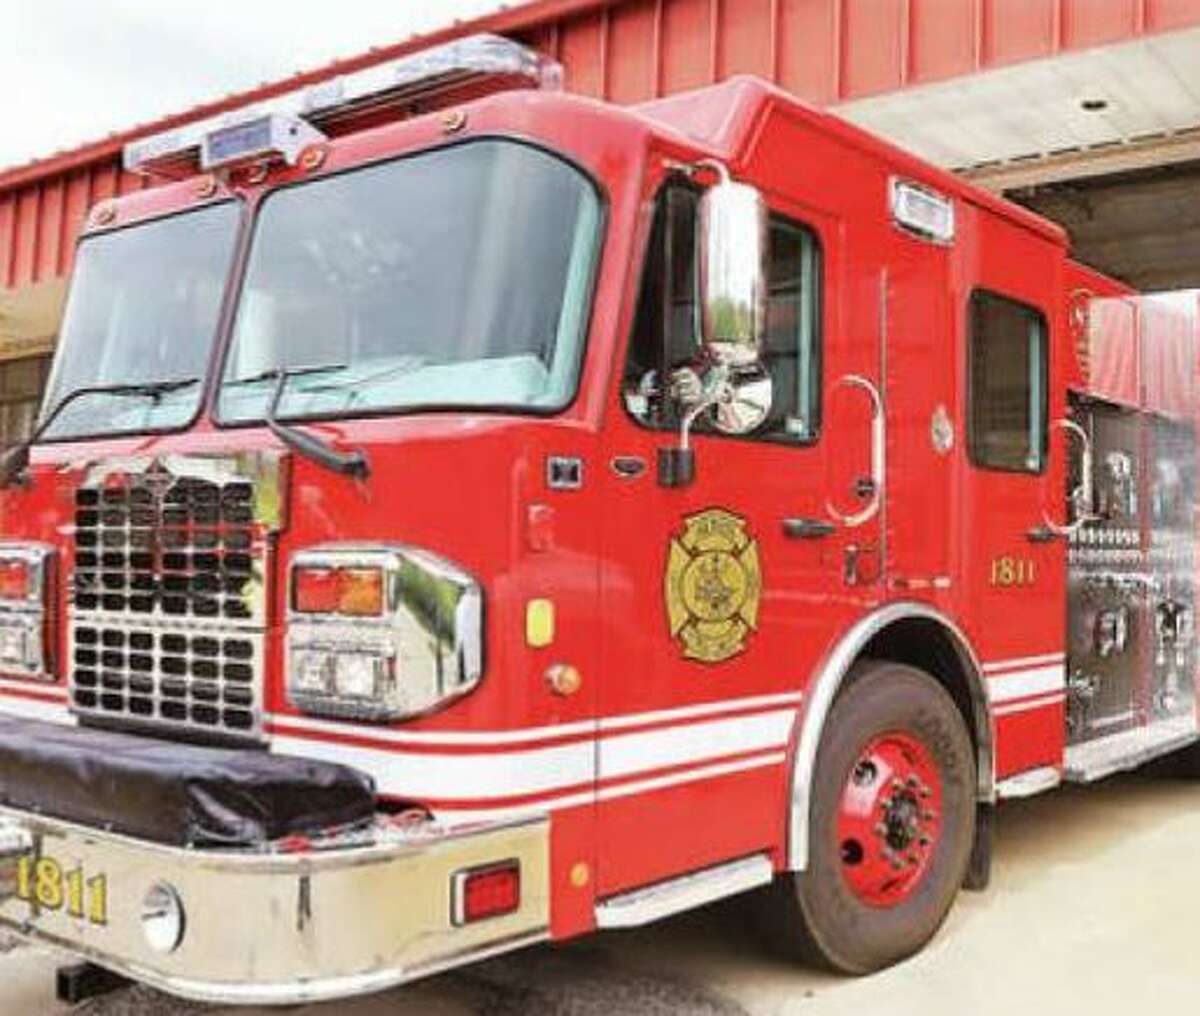 Alton fire reported Thanksgiving Day morning